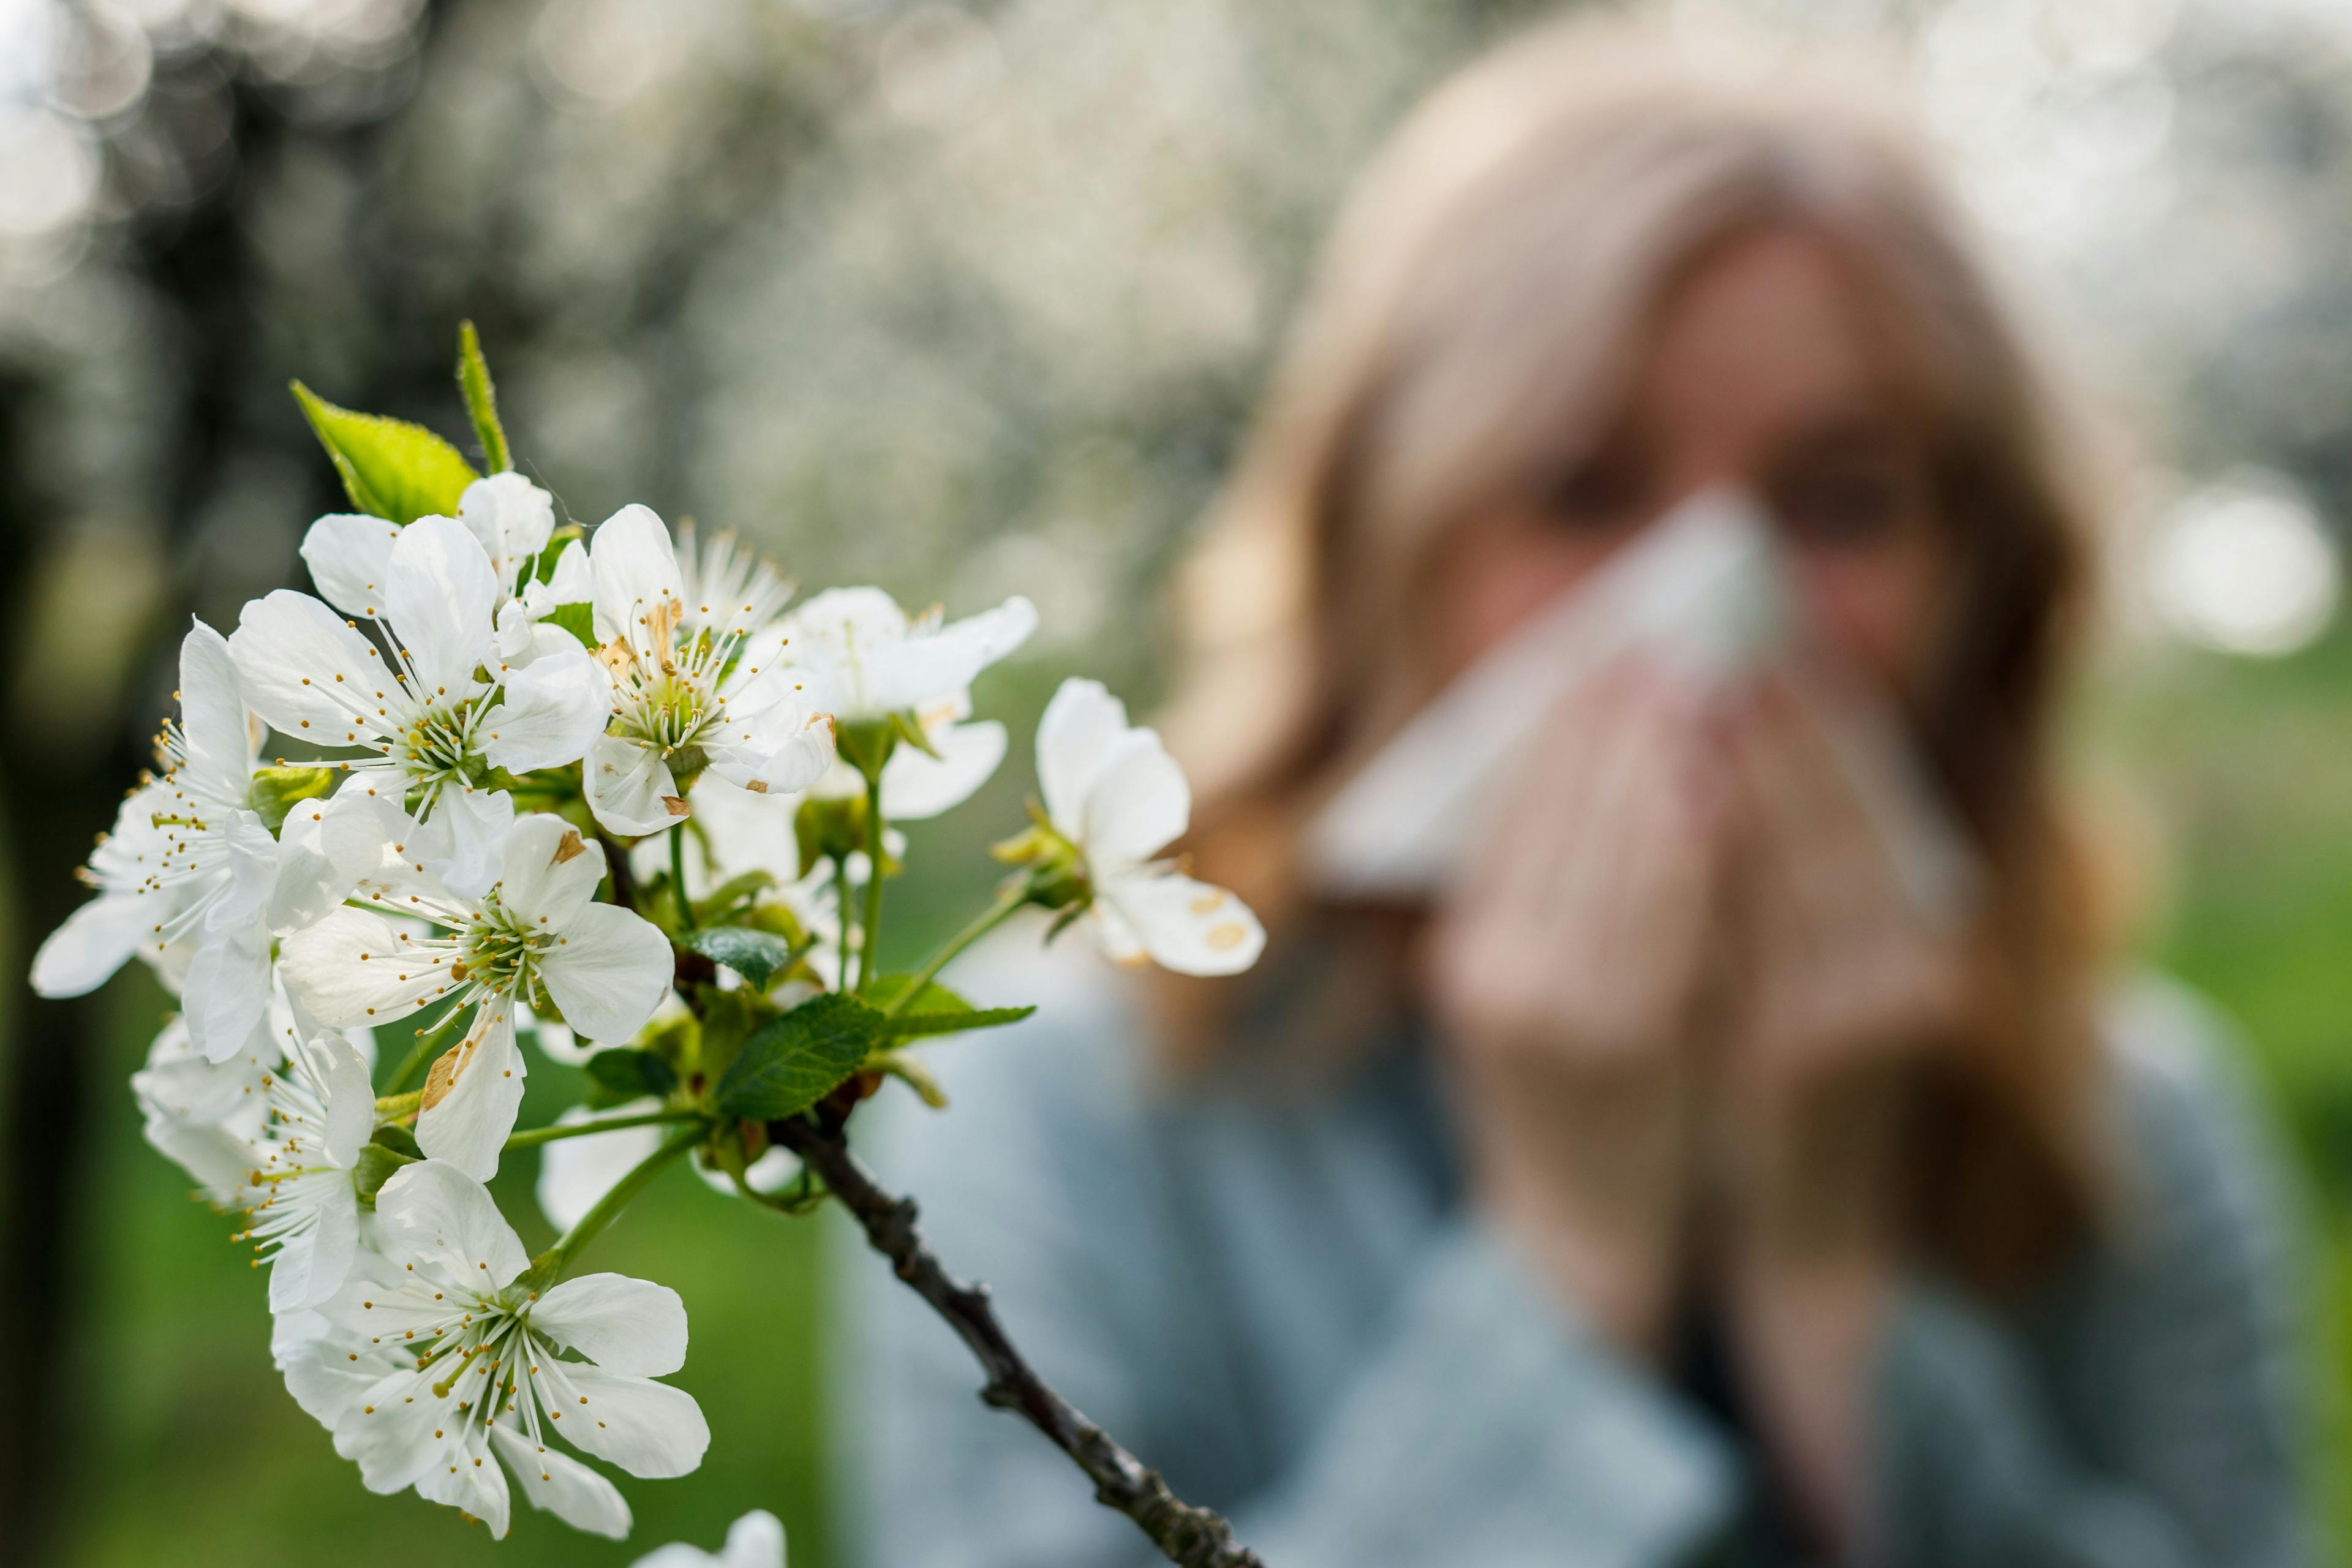 Millions of Americans are living with allergies or asthma. | image credit: encierro - stock.adobe.com